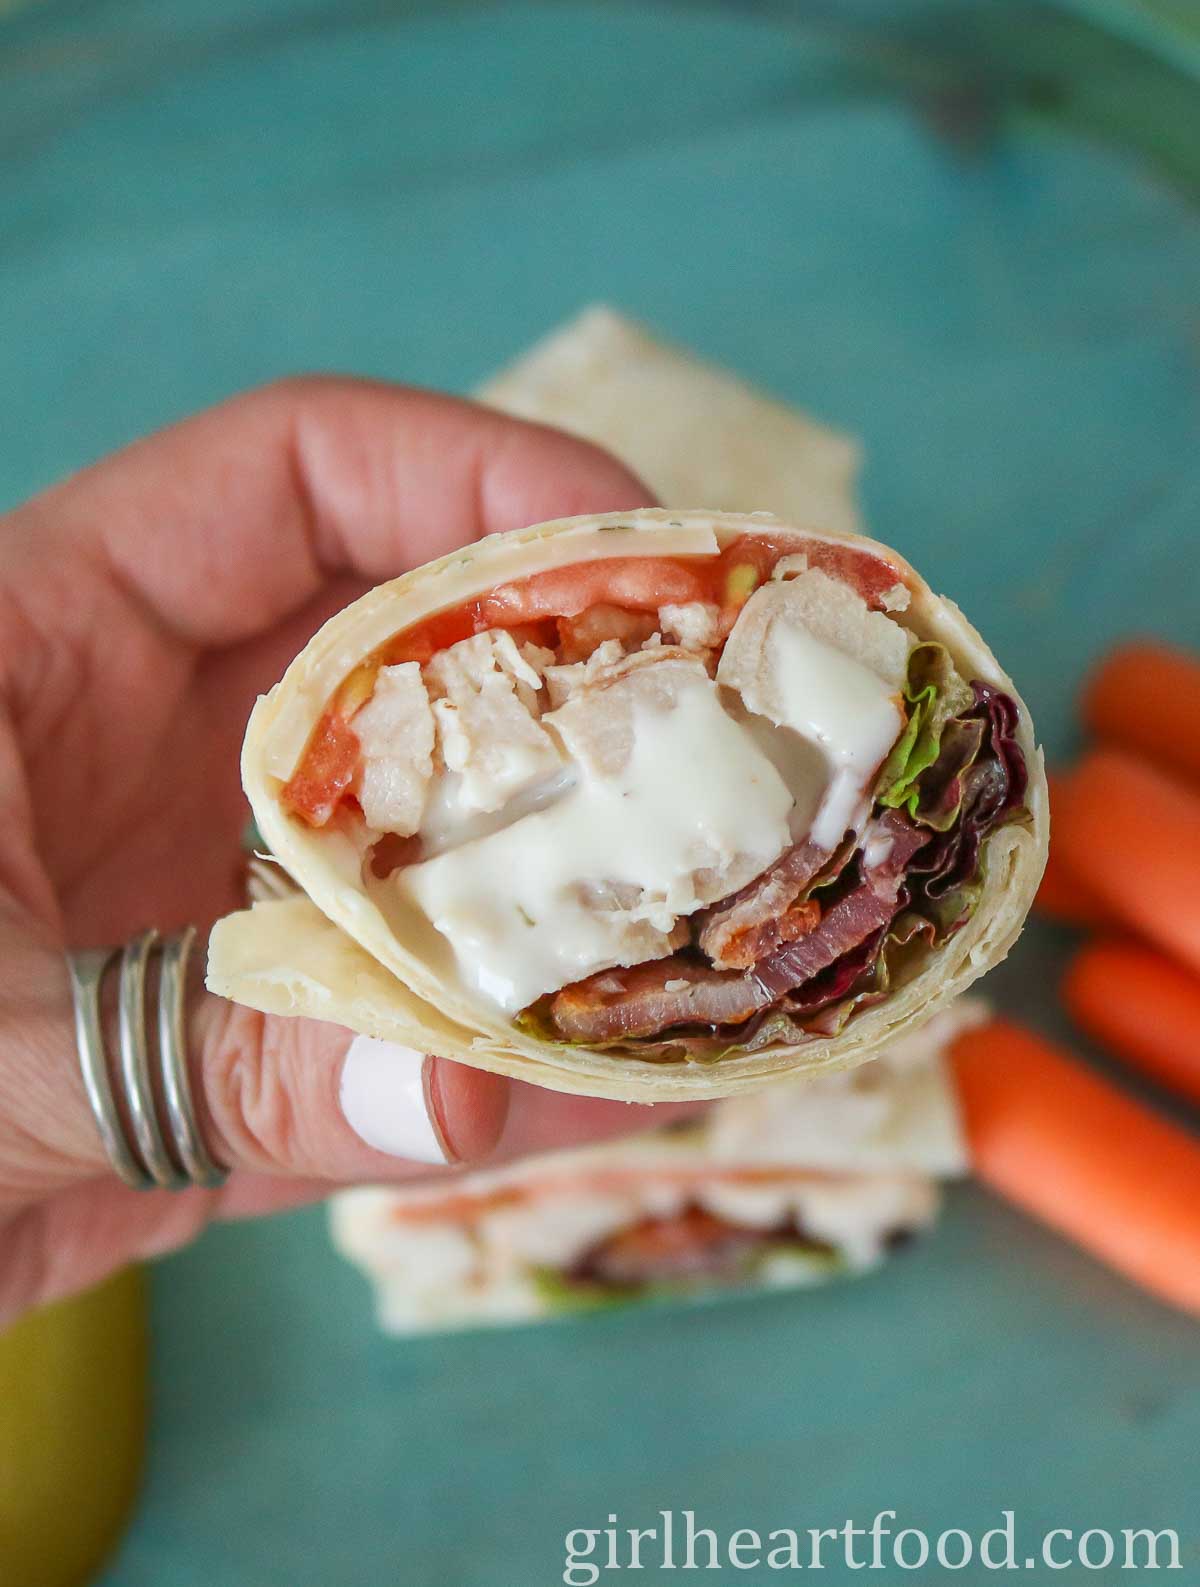 Hand holding a turkey bacon wrap with ranch dressing.